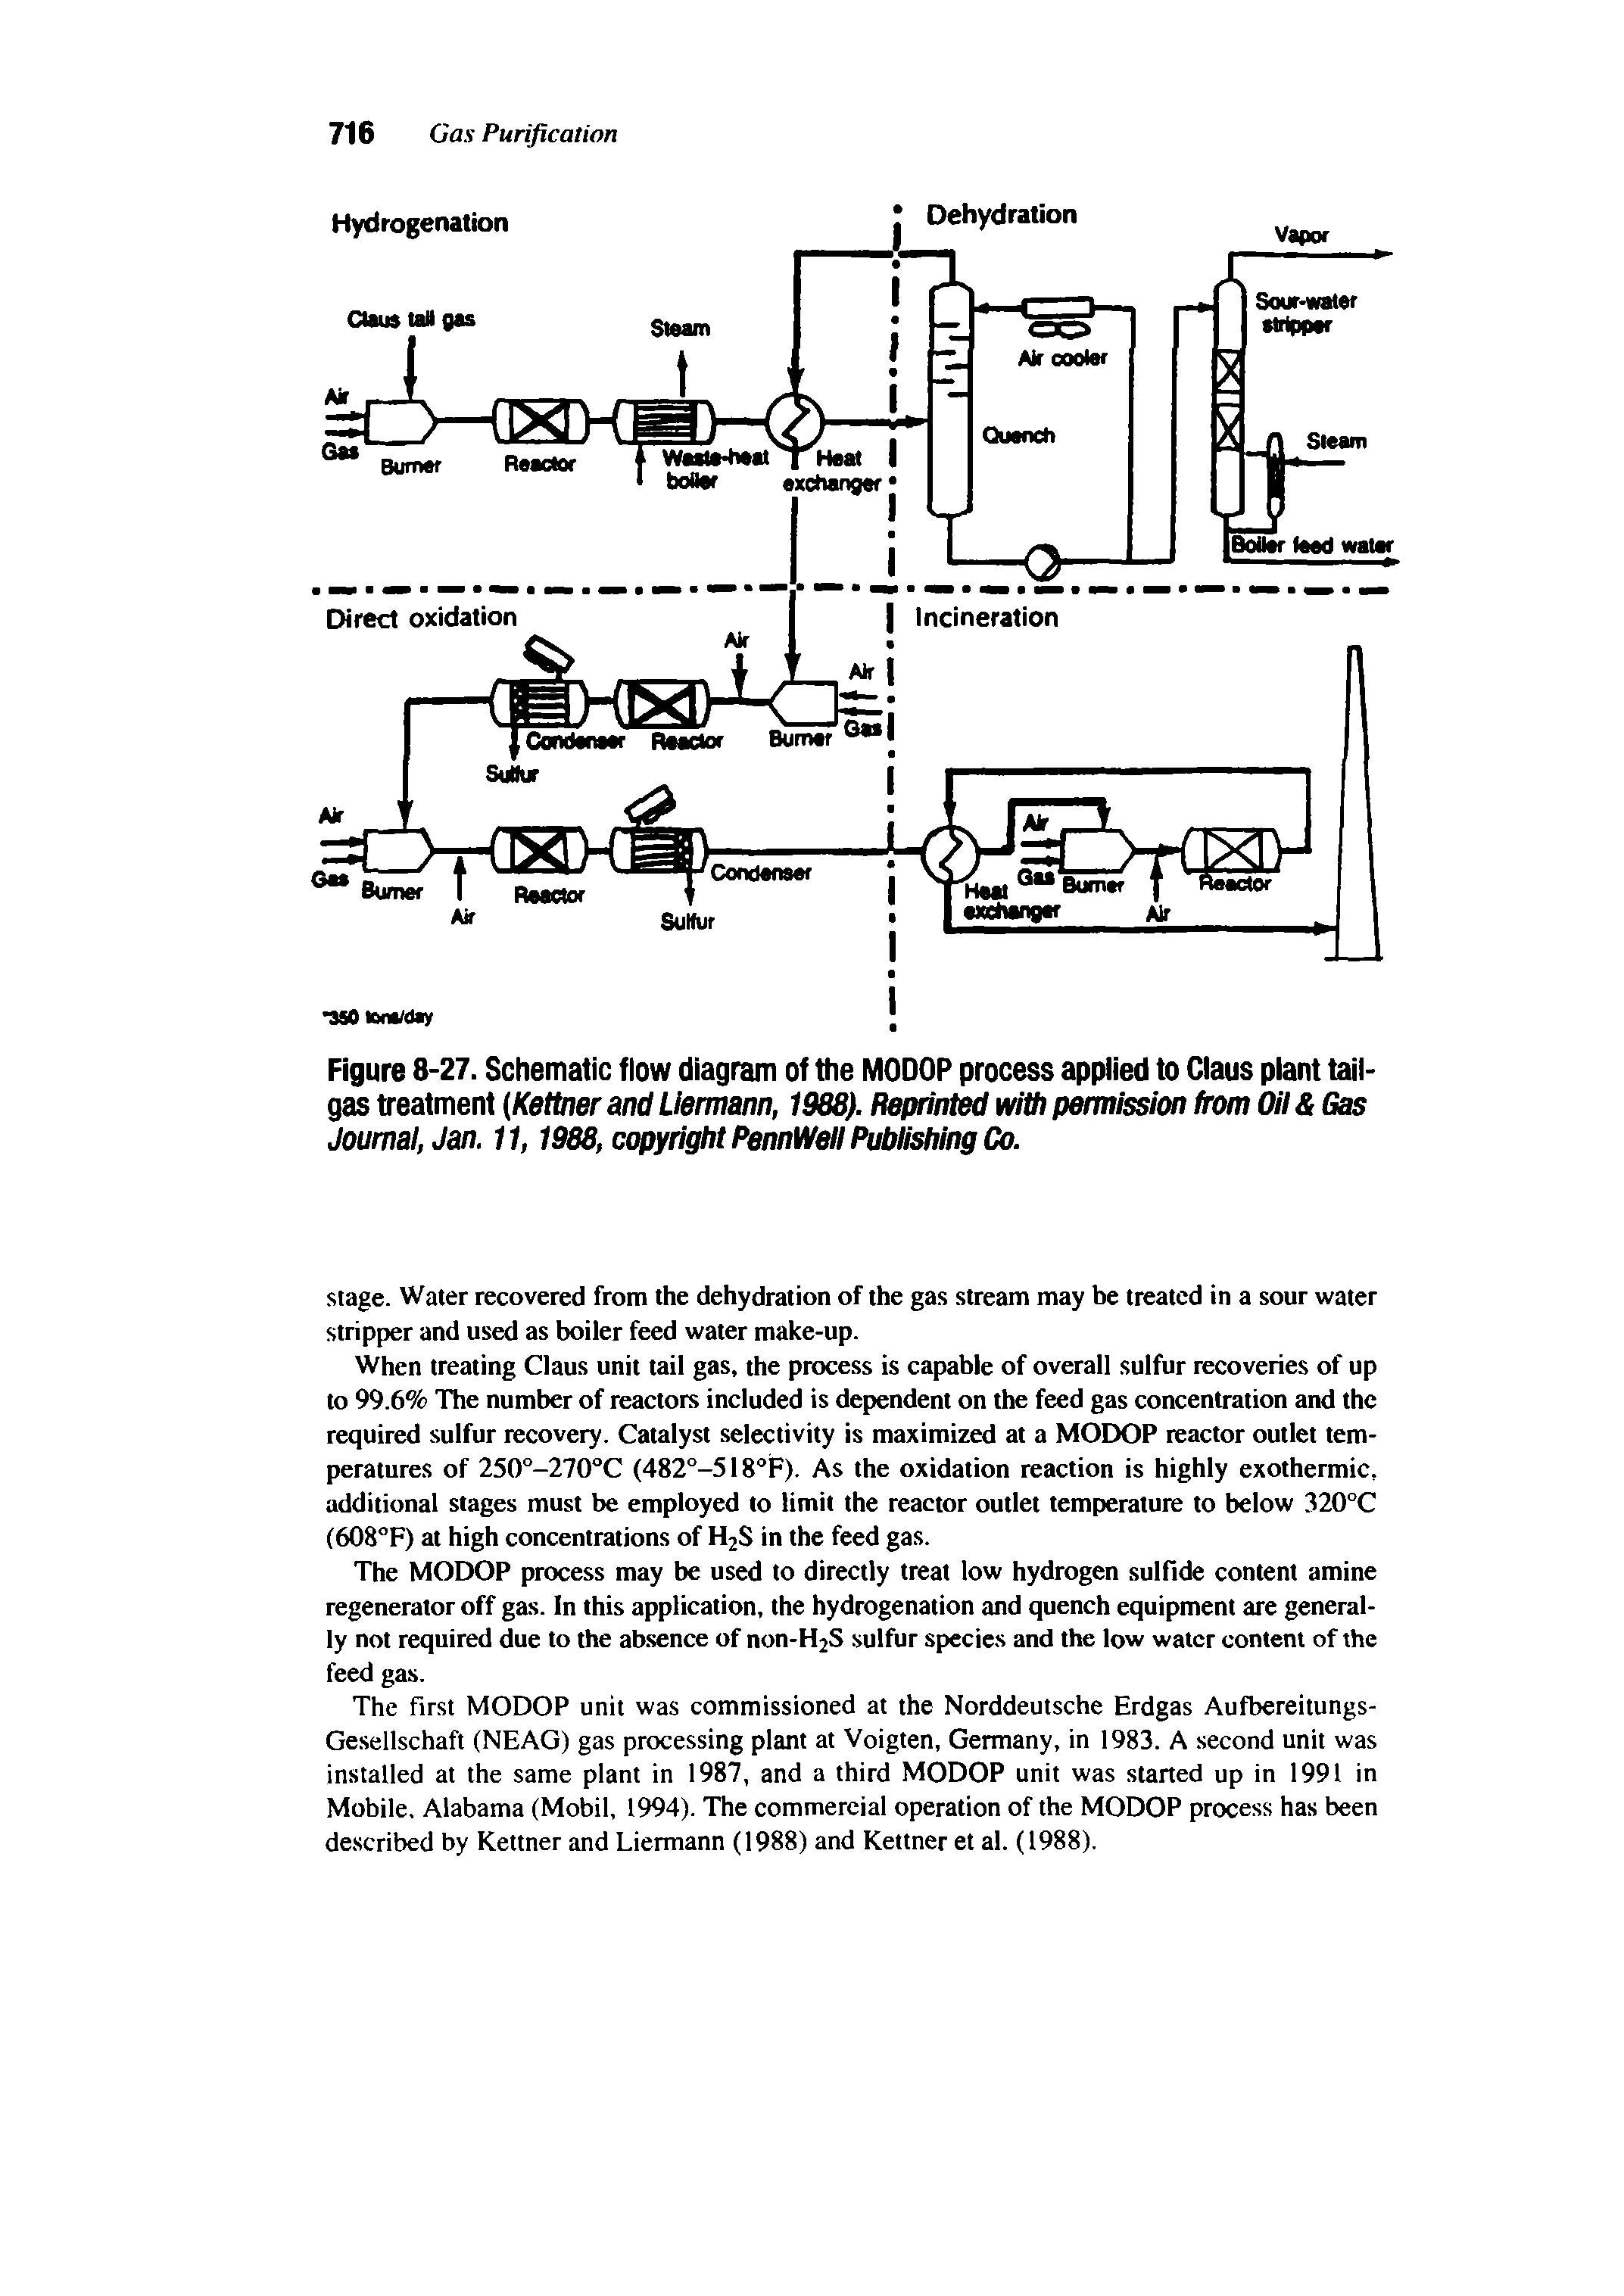 Figure 8-27. Schematic flow diagram of the MODOP process applied to Claus plant tailgas treatment (Kettner and Llermann, 1988). Reprinted with permission from (XI Gas Journal, Jan. 11,1988, copyright PennWeliPidrHshing Co.